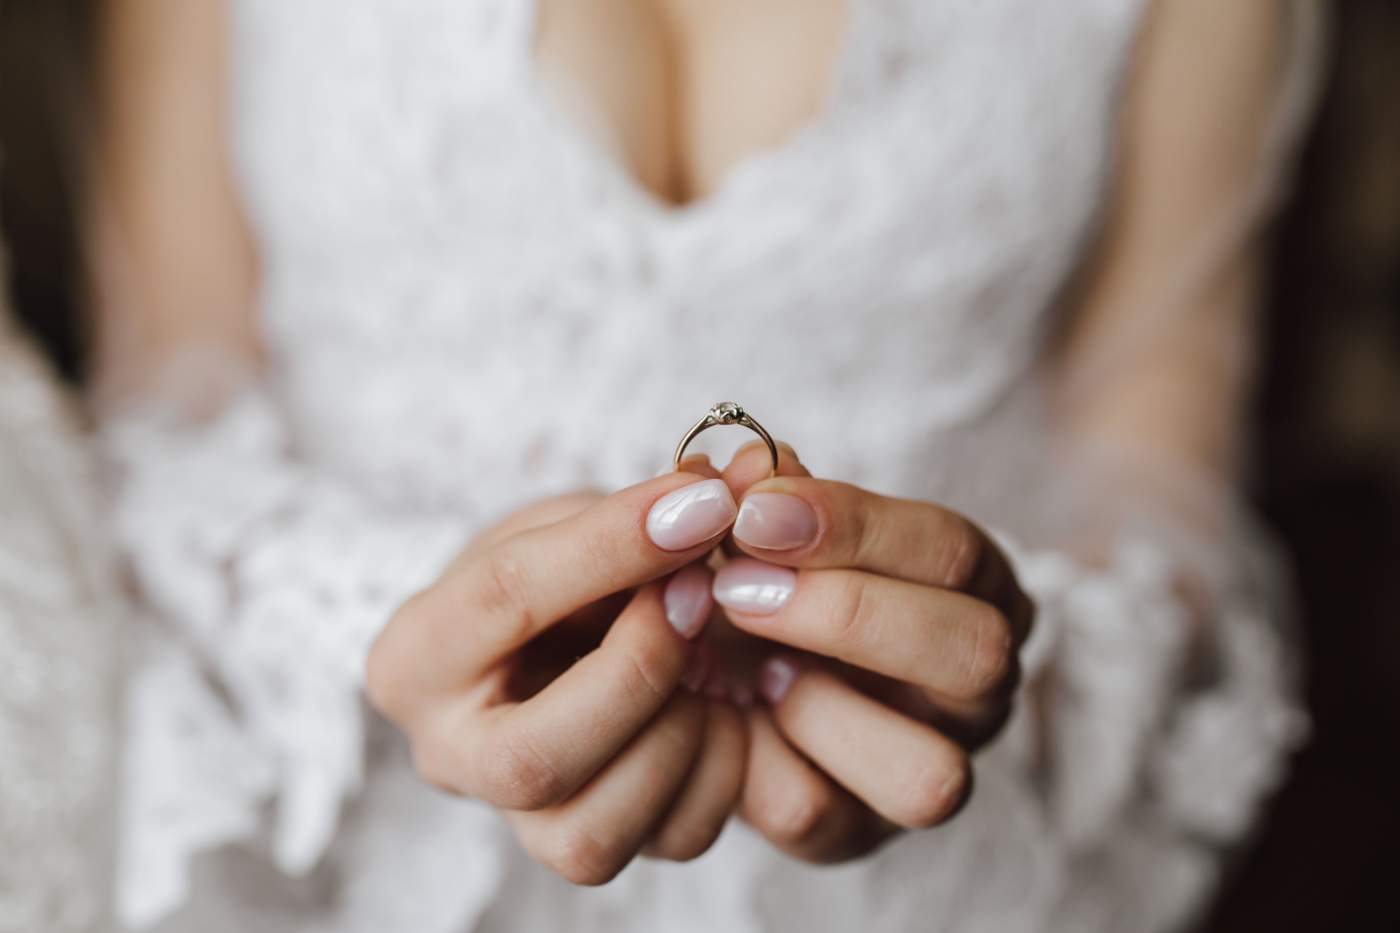 Breast of young bride dressed in wedding dress with engagement ring in hands with diamond